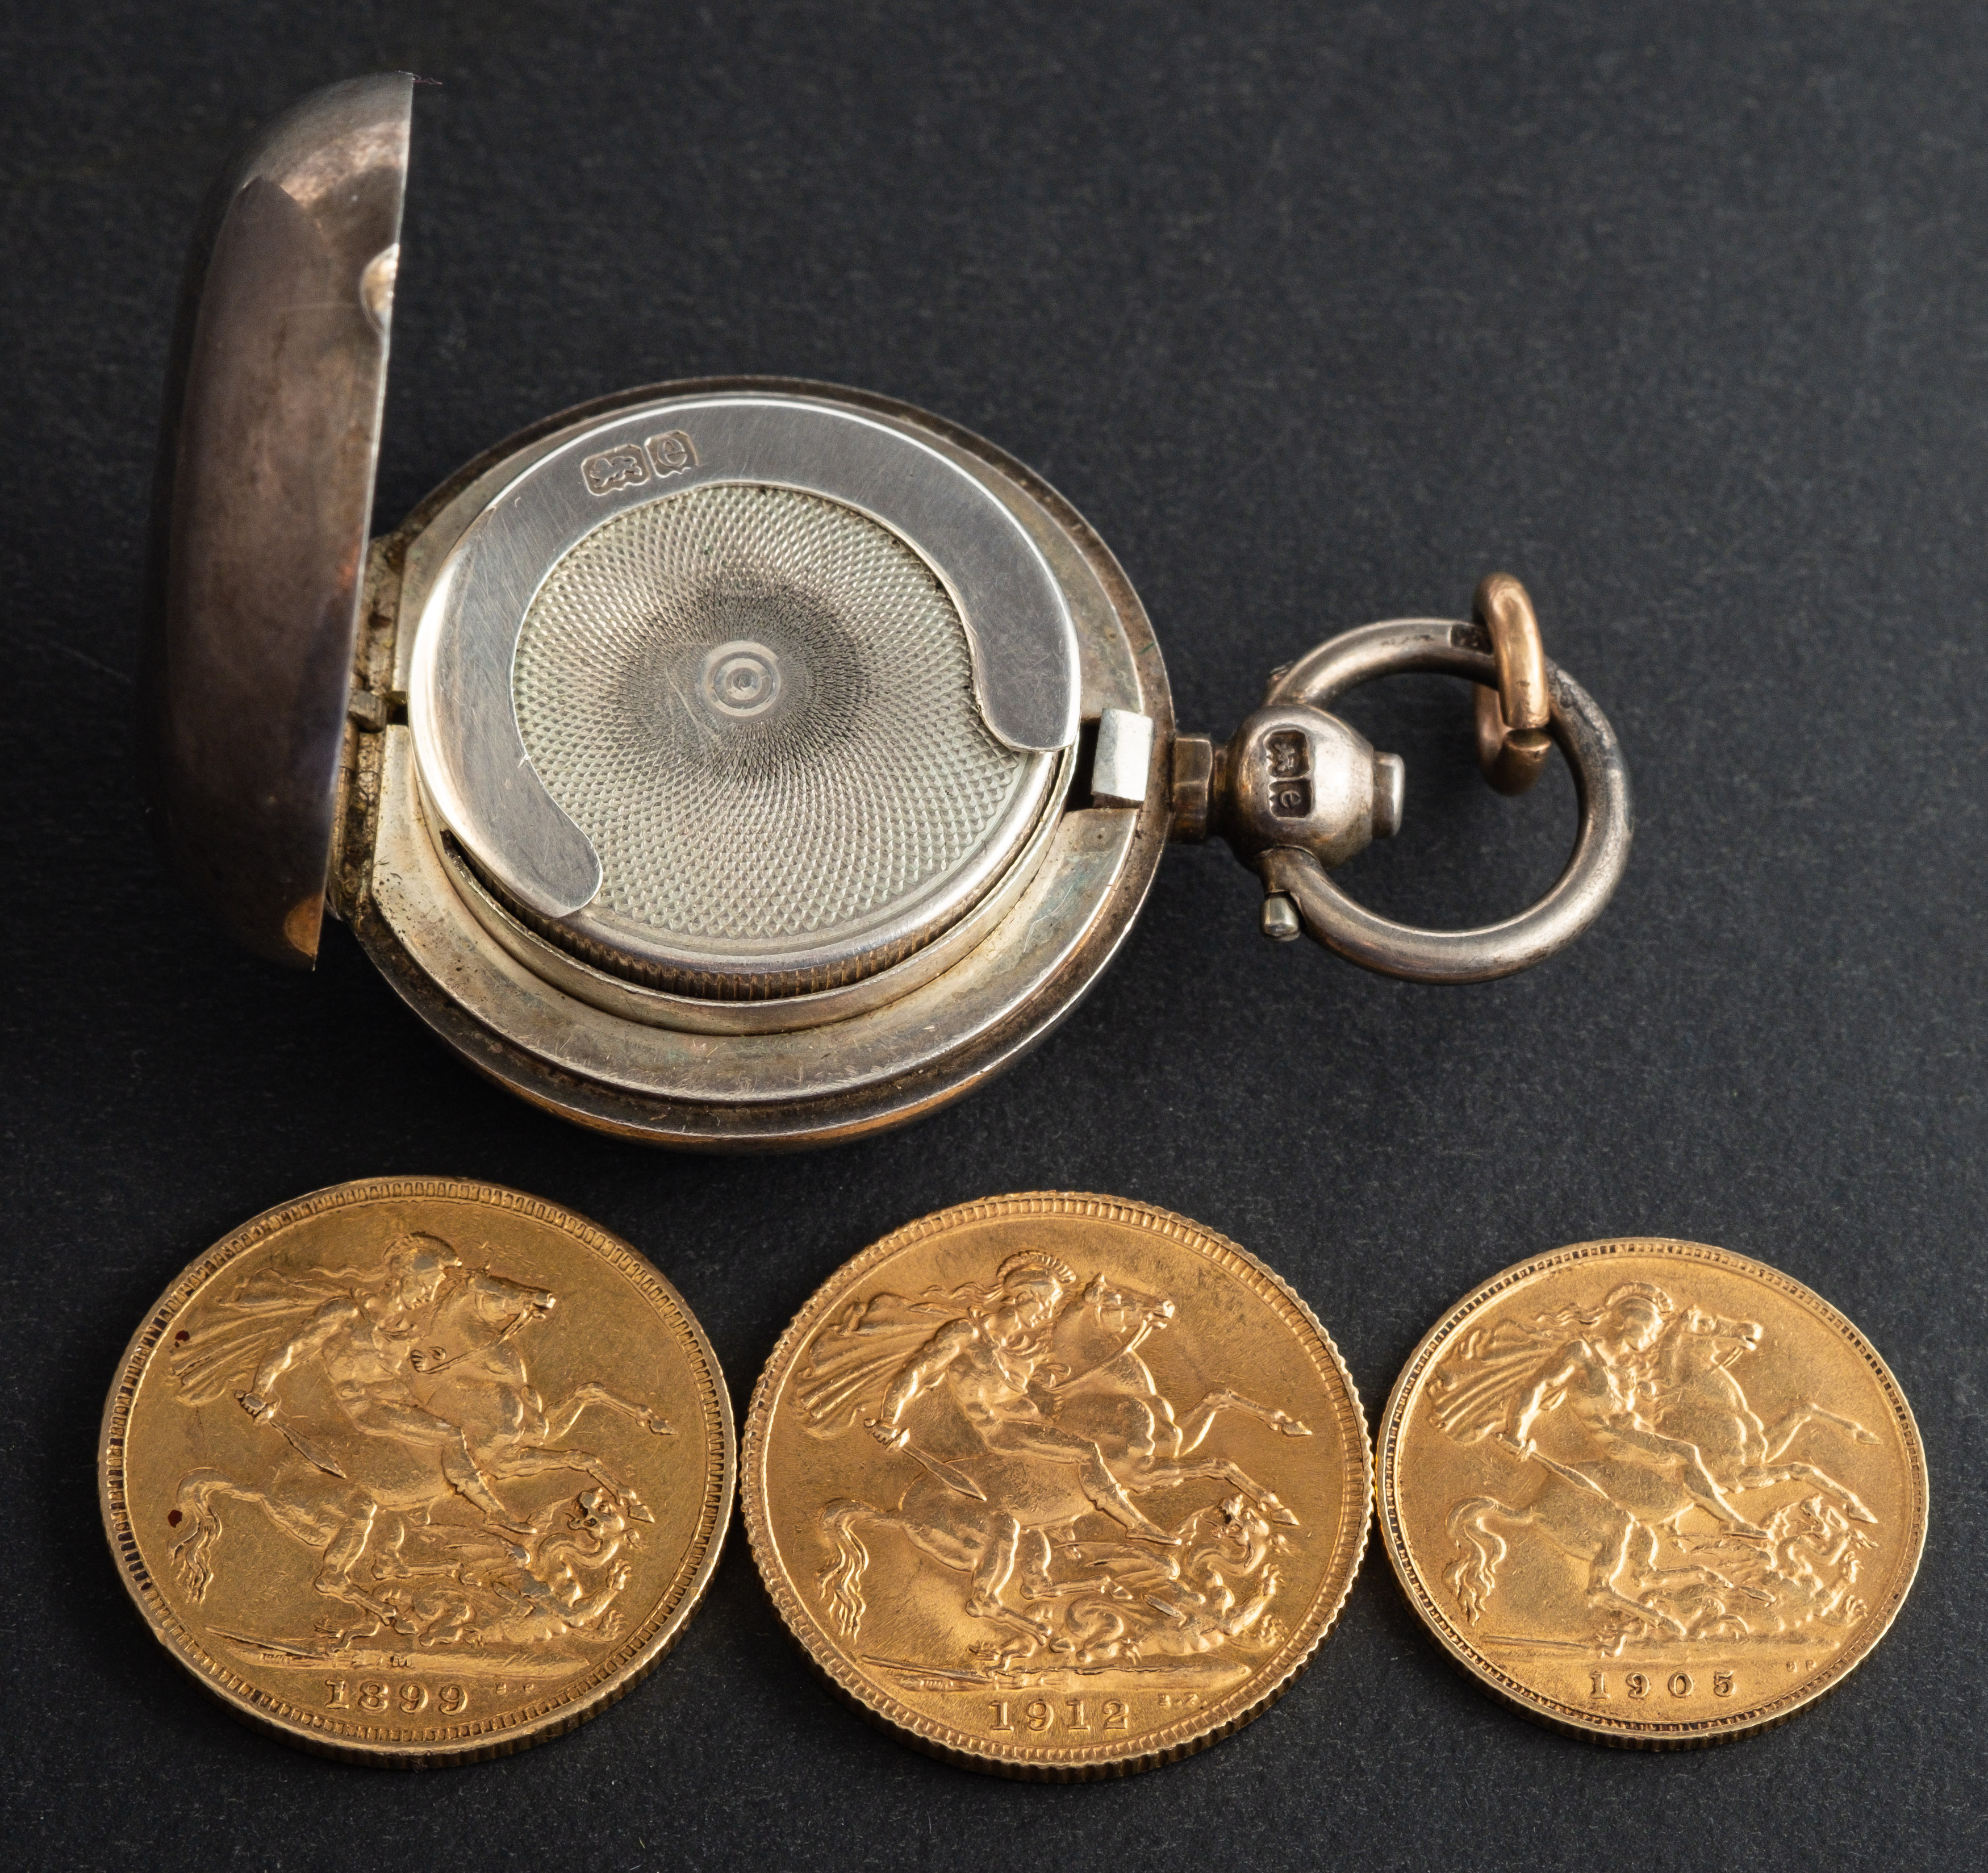 Three gold coins, including a Victorian sovereign coin, dated 1899, a George V sovereign coin,